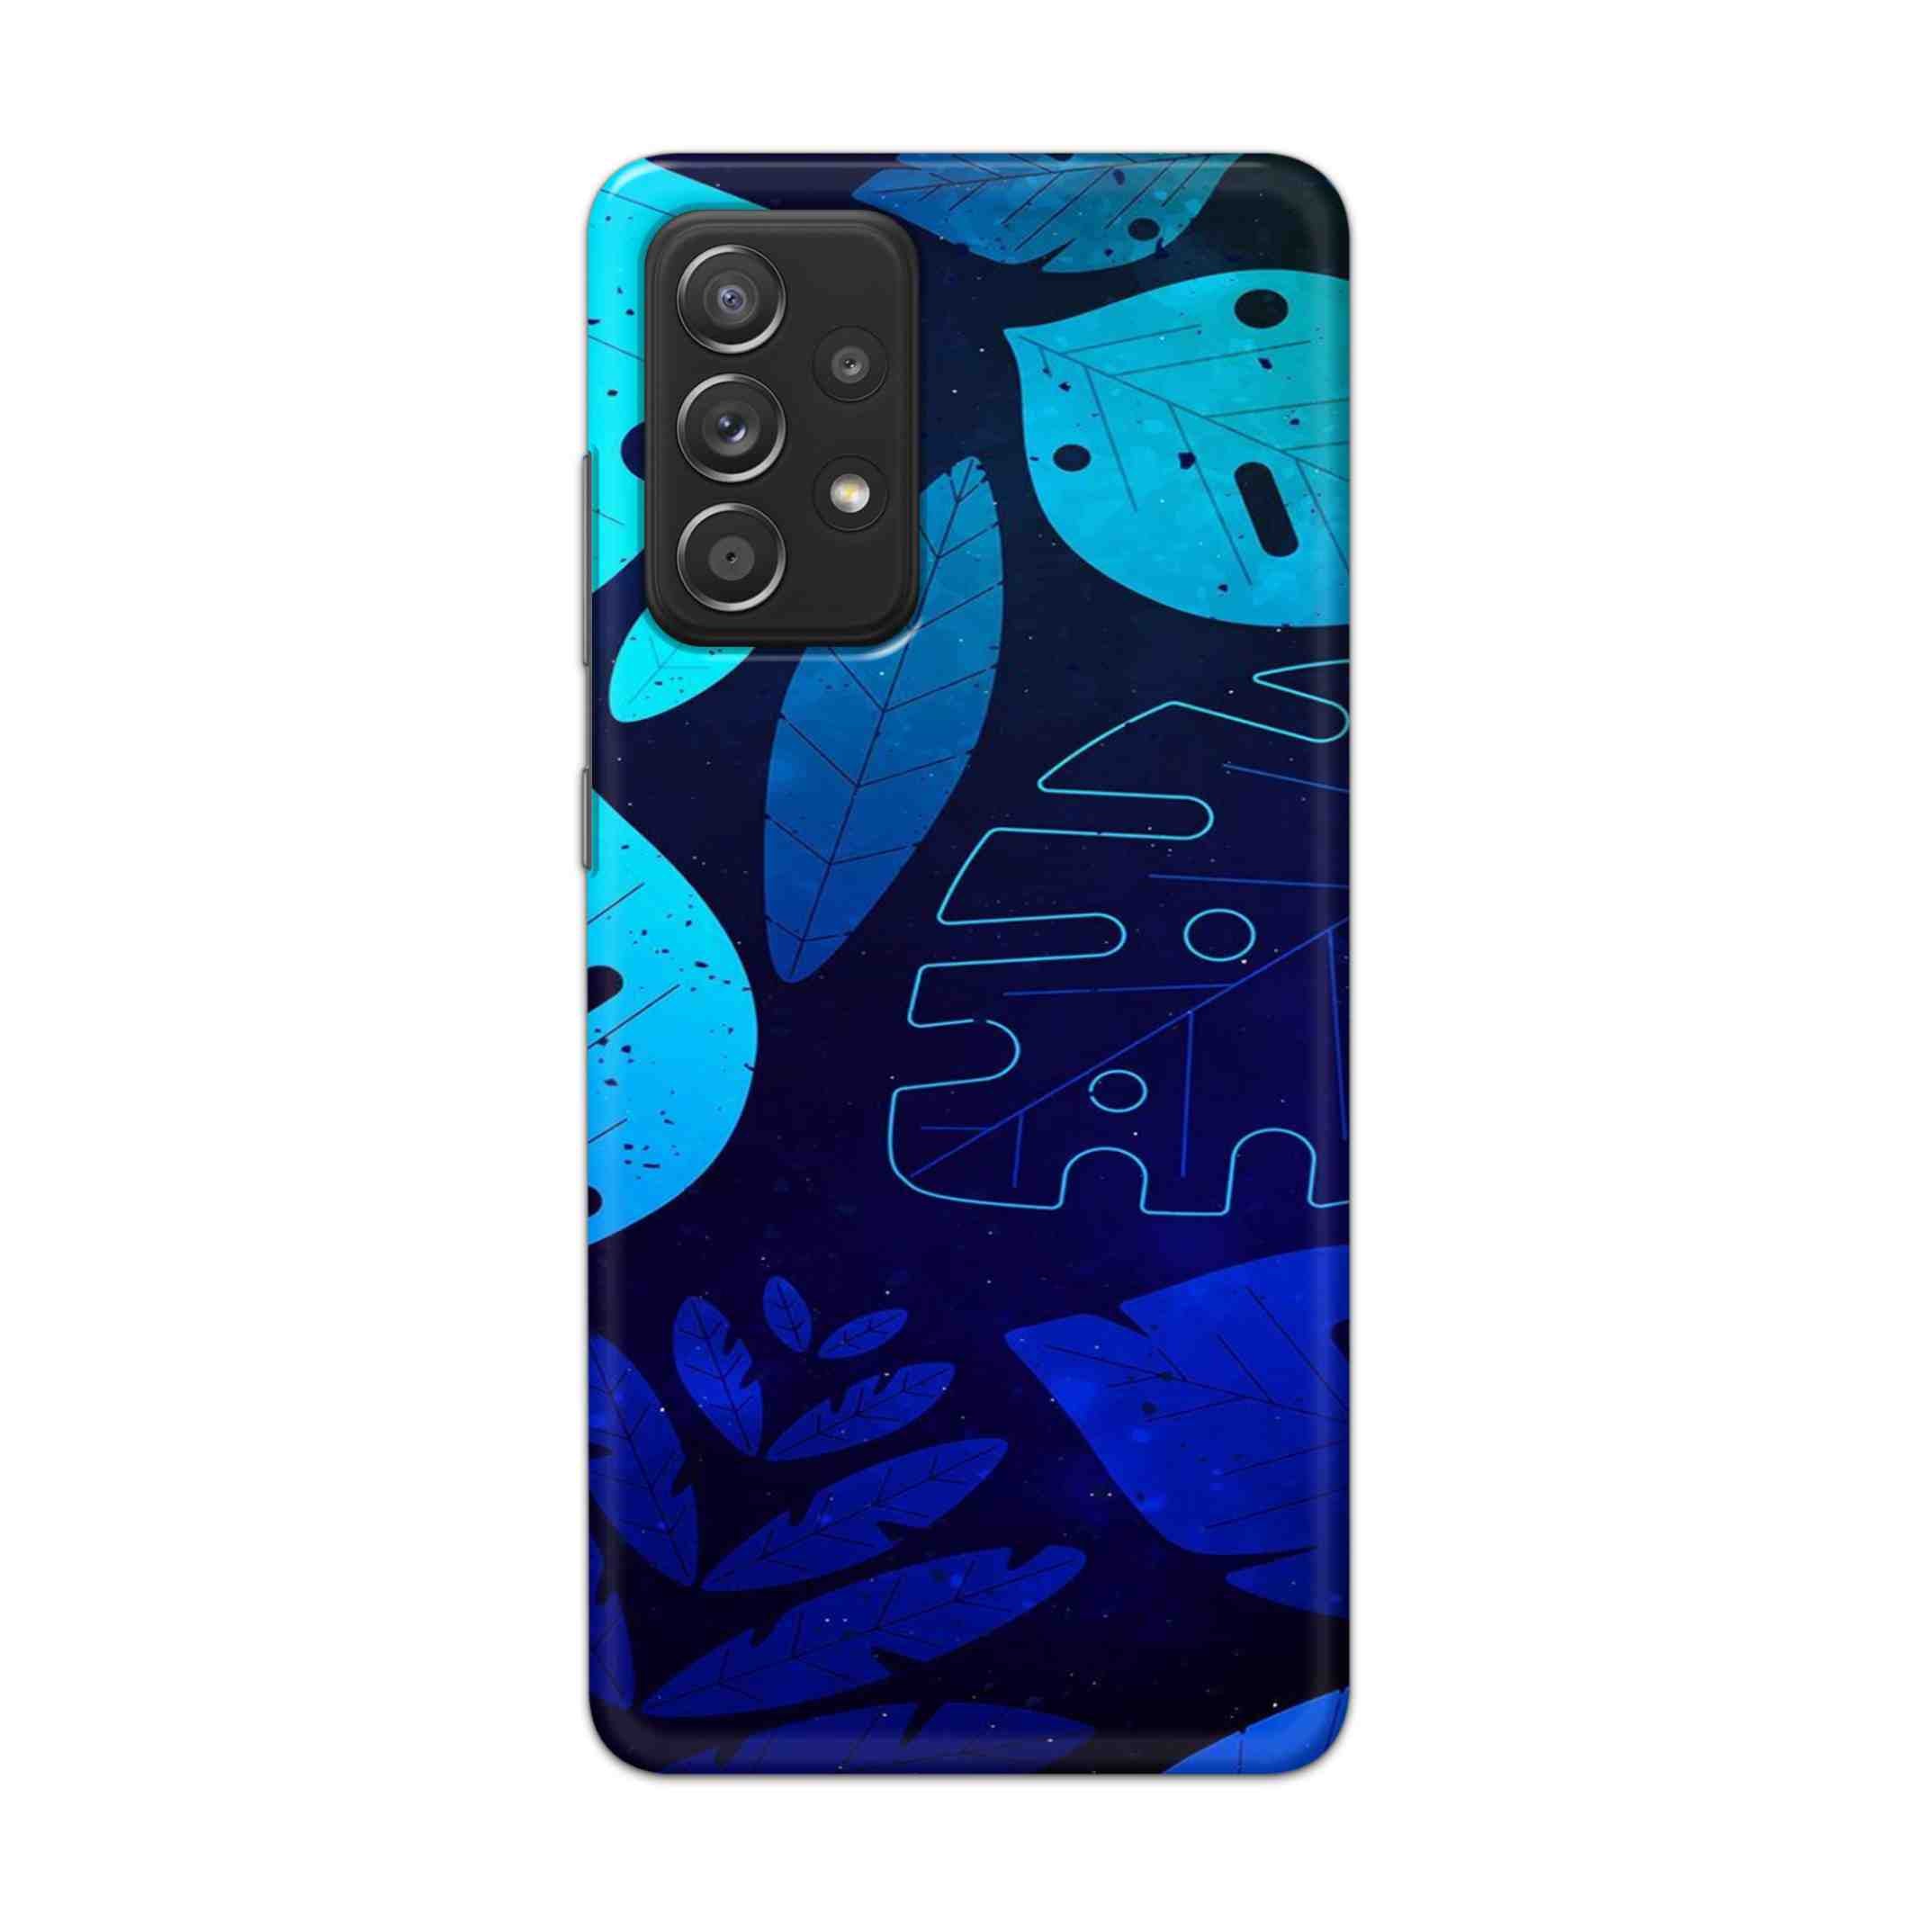 Buy Neon Leaf Hard Back Mobile Phone Case Cover For Samsung Galaxy A52 Online